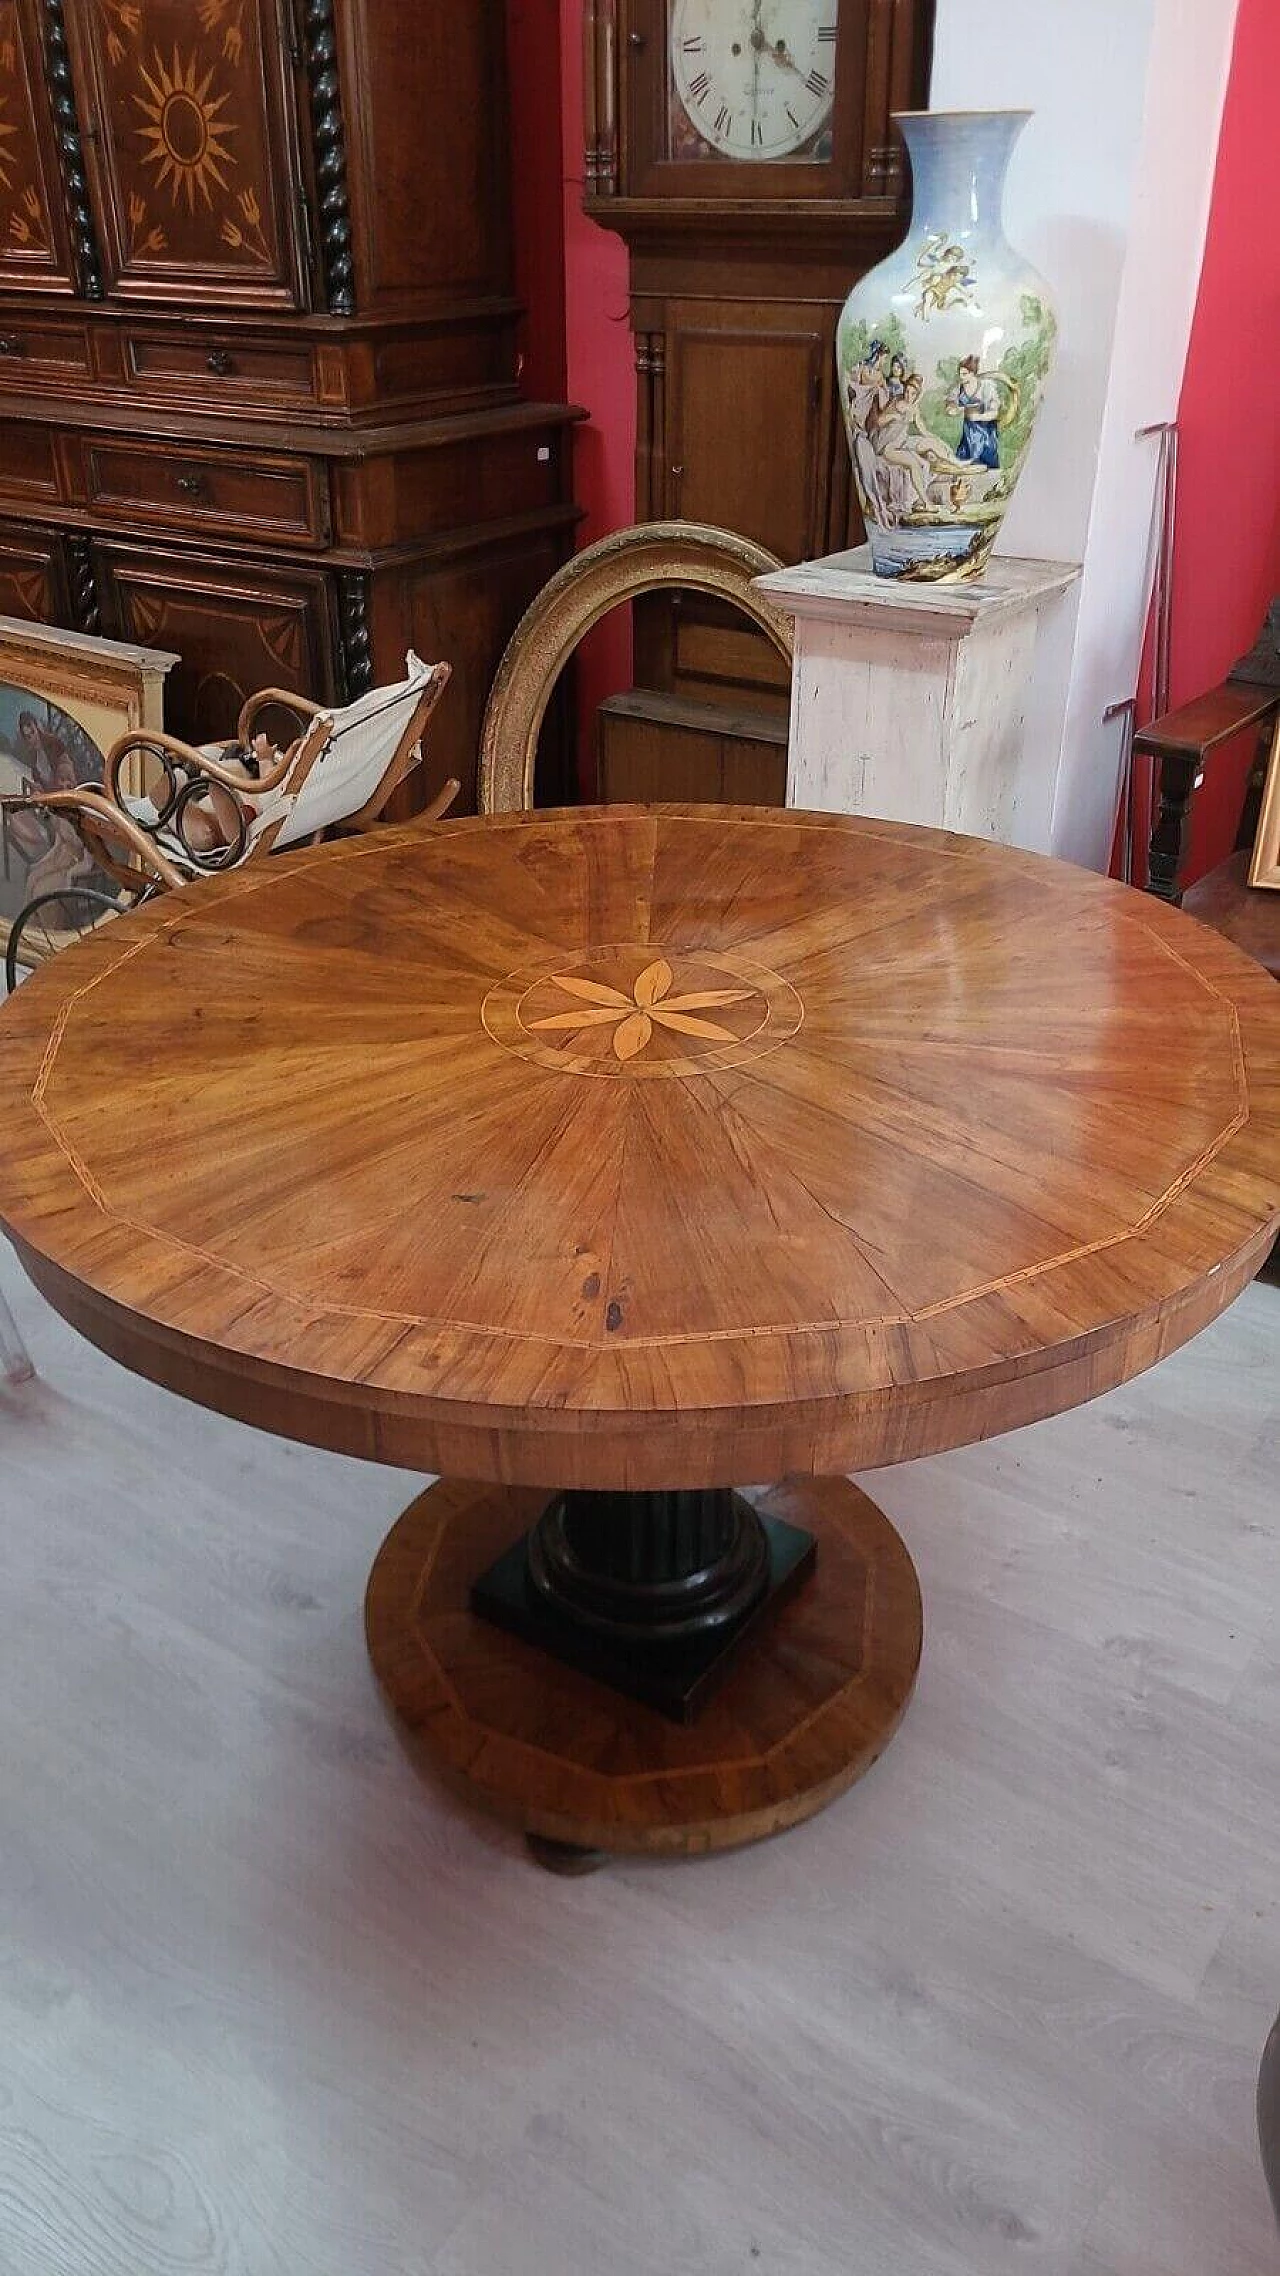 Empire round table panelled in walnut with maple inlay, early 19th century 1